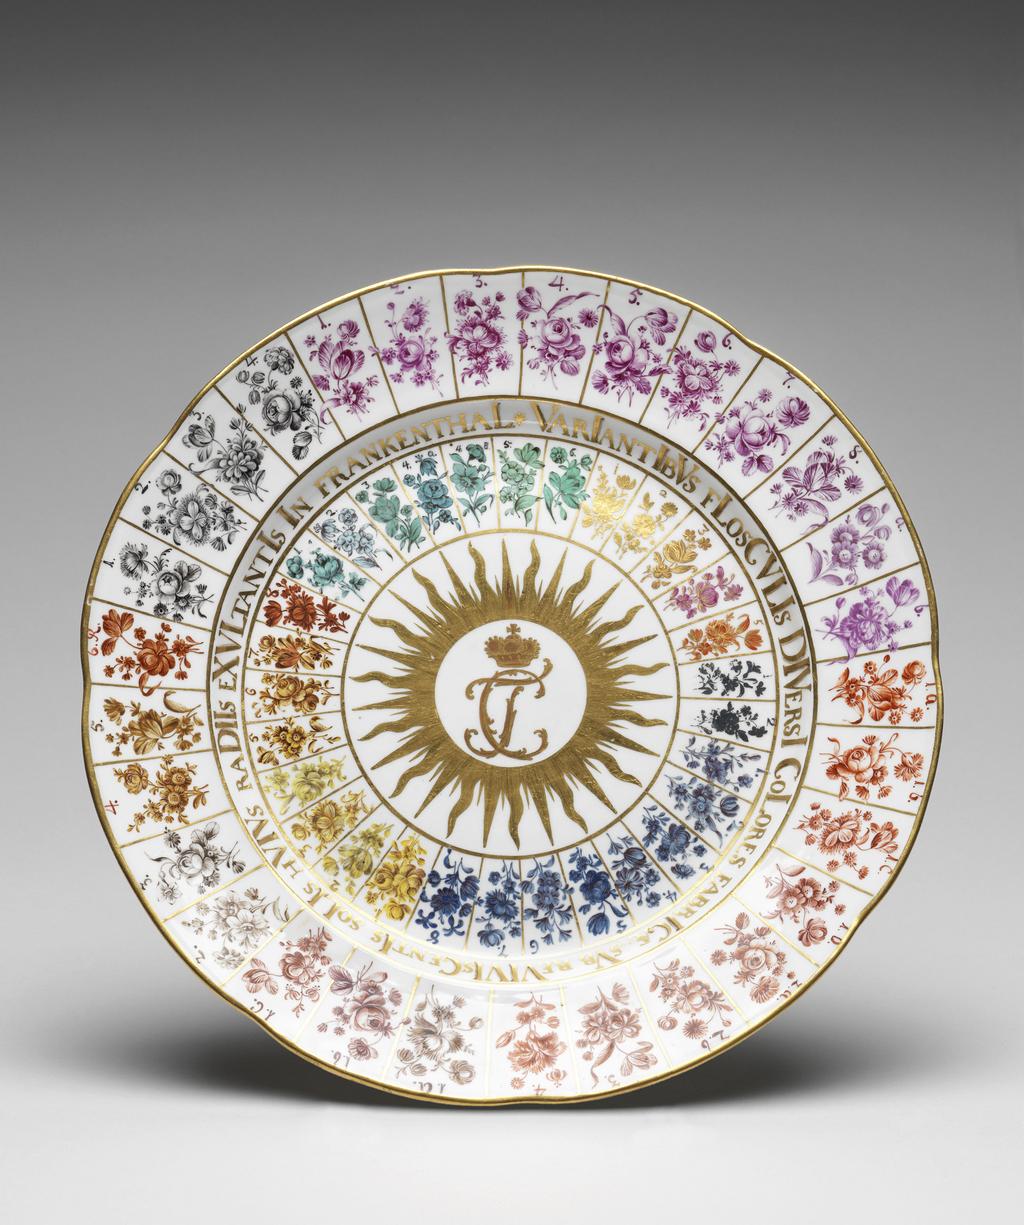 An image of Trial plate. Frankenthal Porcelain Factory, Germany, The Palatinate. Circular with eight slight arcs on the edge, sloping concave rim, shallow curved sides, and flat centre, standing on a footring. Decorated in the centre with a gold crown of TC monogram (Carl Theodore) surrounded by a sunburst with wavy rays. Around this are thirty radiating compartmens outlined in gold, each painted with a spray of flowers. On the sides of the well is an inscription in Latin VARIANTIBVS FLOSCVLIS DIVERSIL COLORES FABRICA SVB REVIVI GENTIS SOLIS HVIVS RADIIS EXVLTANTIS IN FRANKENTAAL. Hard-paste porcelain, moulded, painted in enamels, and gilded, height 3.2 cm, diameter 24.7 cm, circa 1775. Rococo. Notes: Carl Theodore was the Elector Palatine.